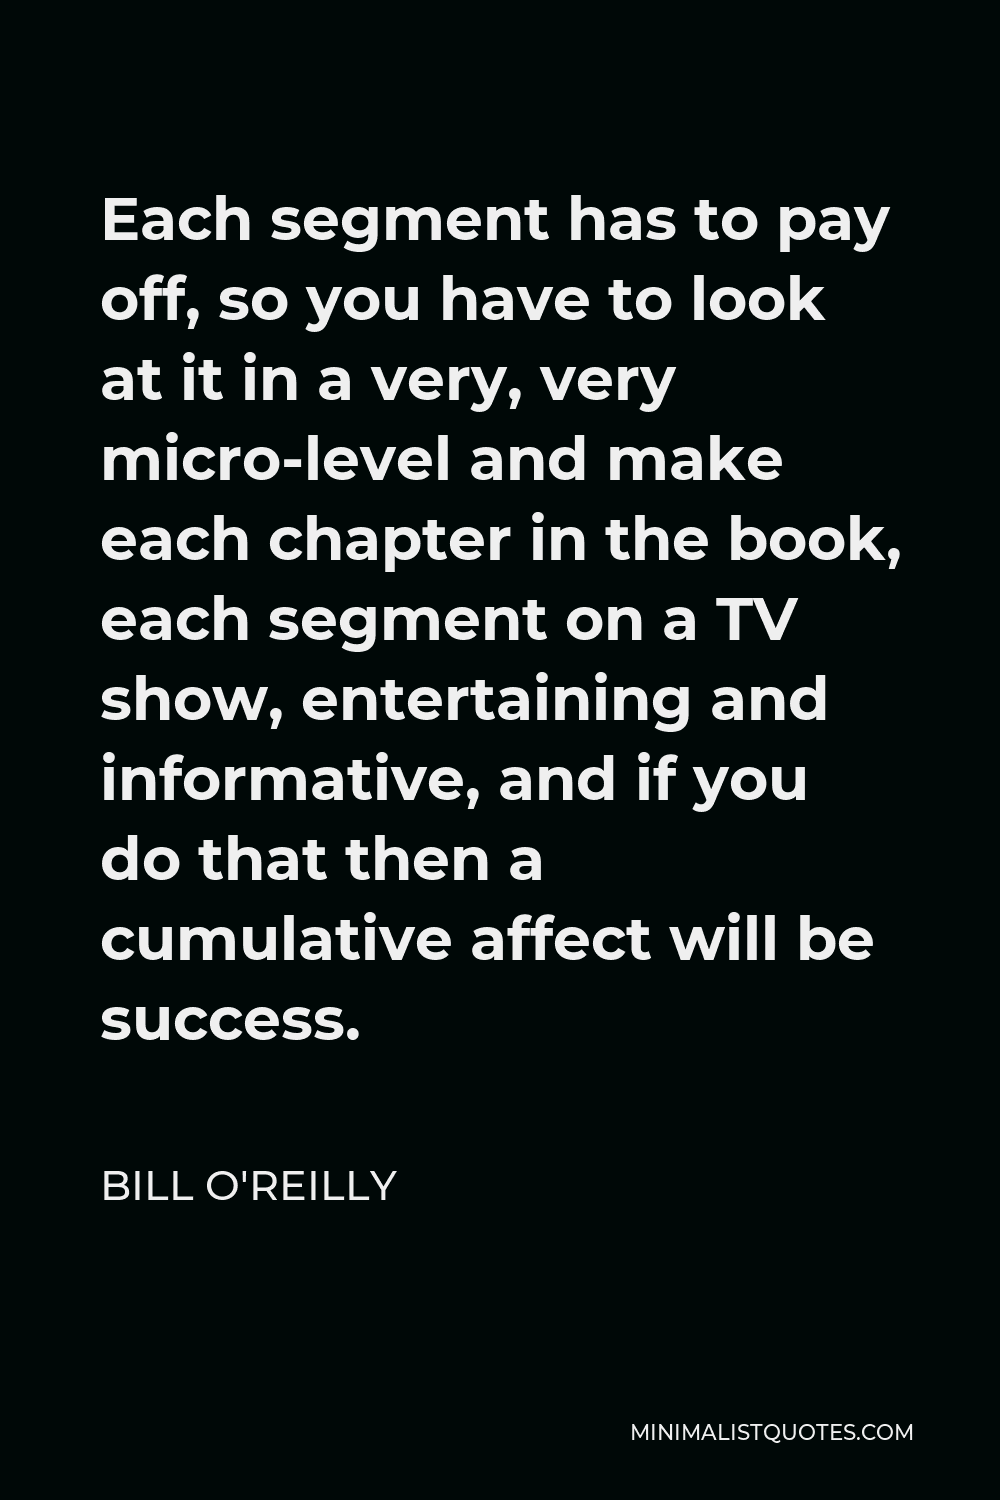 Bill O'Reilly Quote - Each segment has to pay off, so you have to look at it in a very, very micro-level and make each chapter in the book, each segment on a TV show, entertaining and informative, and if you do that then a cumulative affect will be success.